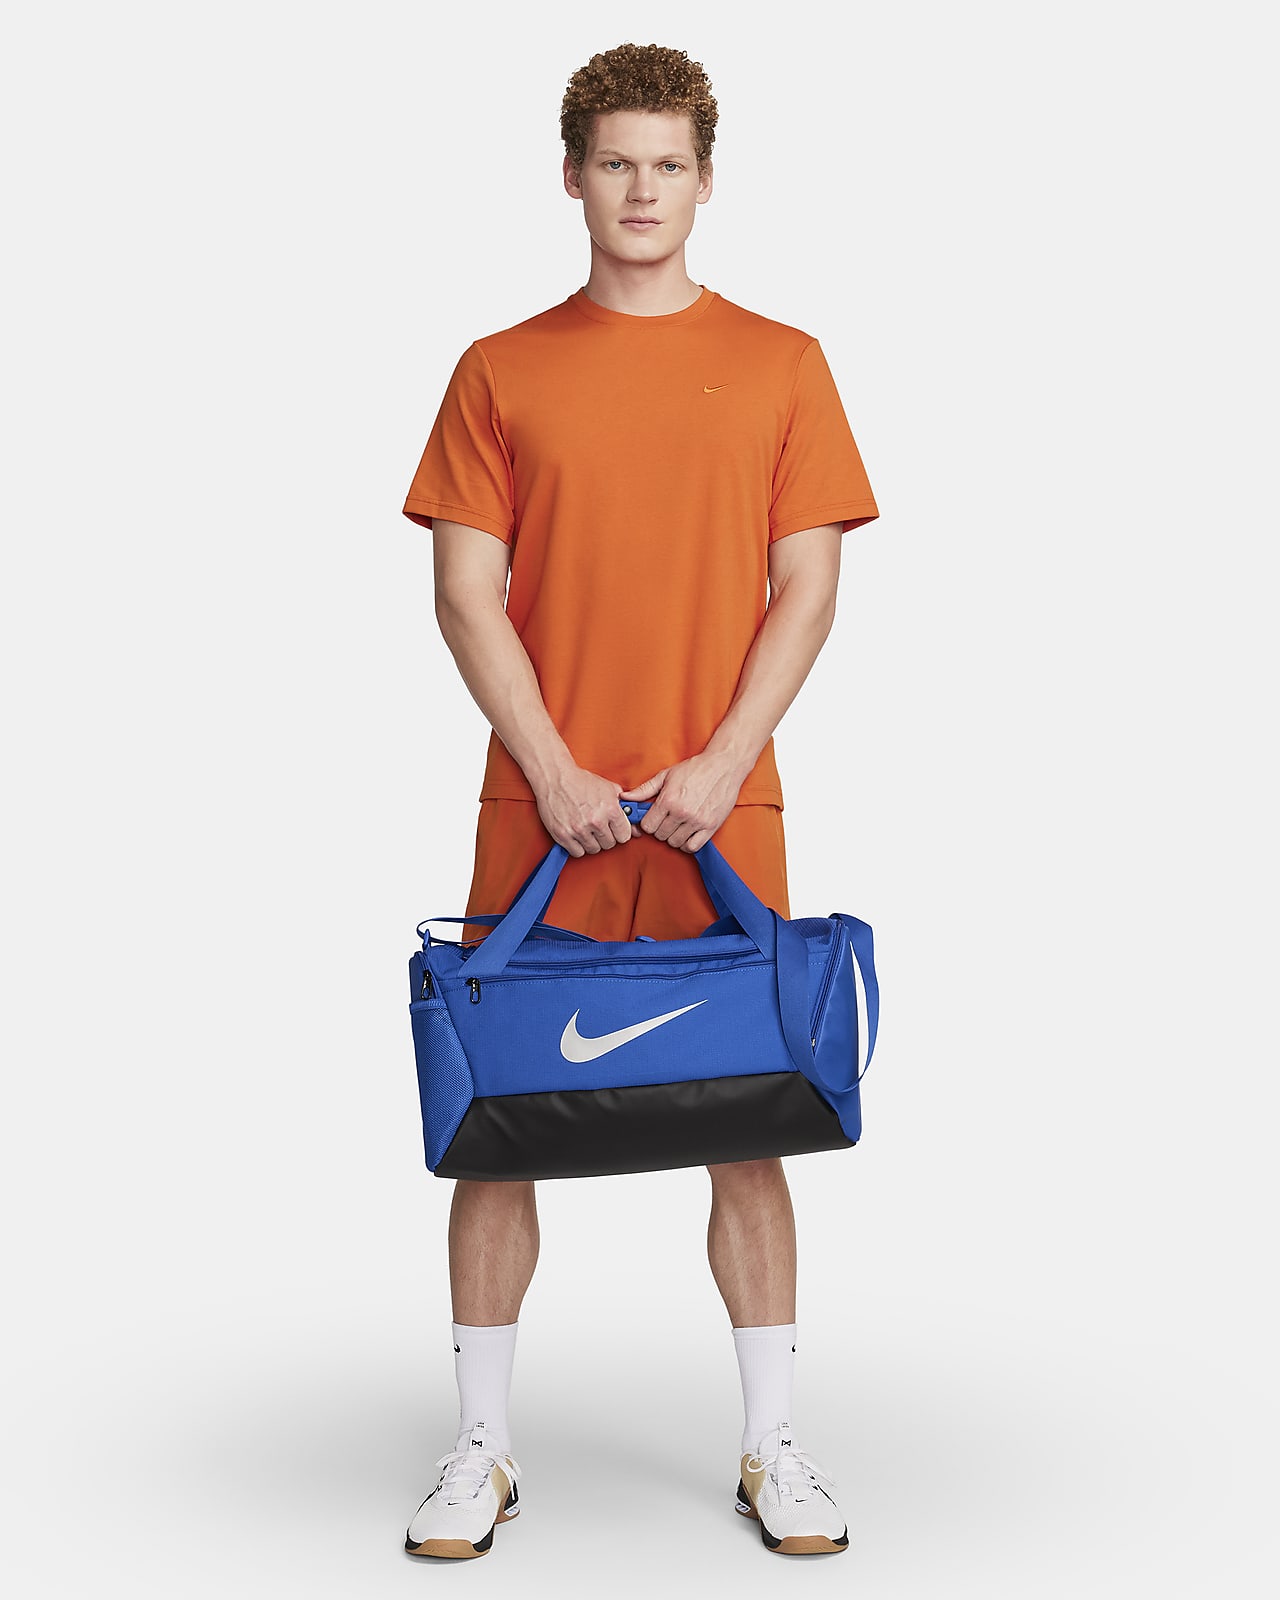 Unboxing/Reviewing The Nike Brasilia Gym Bag (Extra Small) 